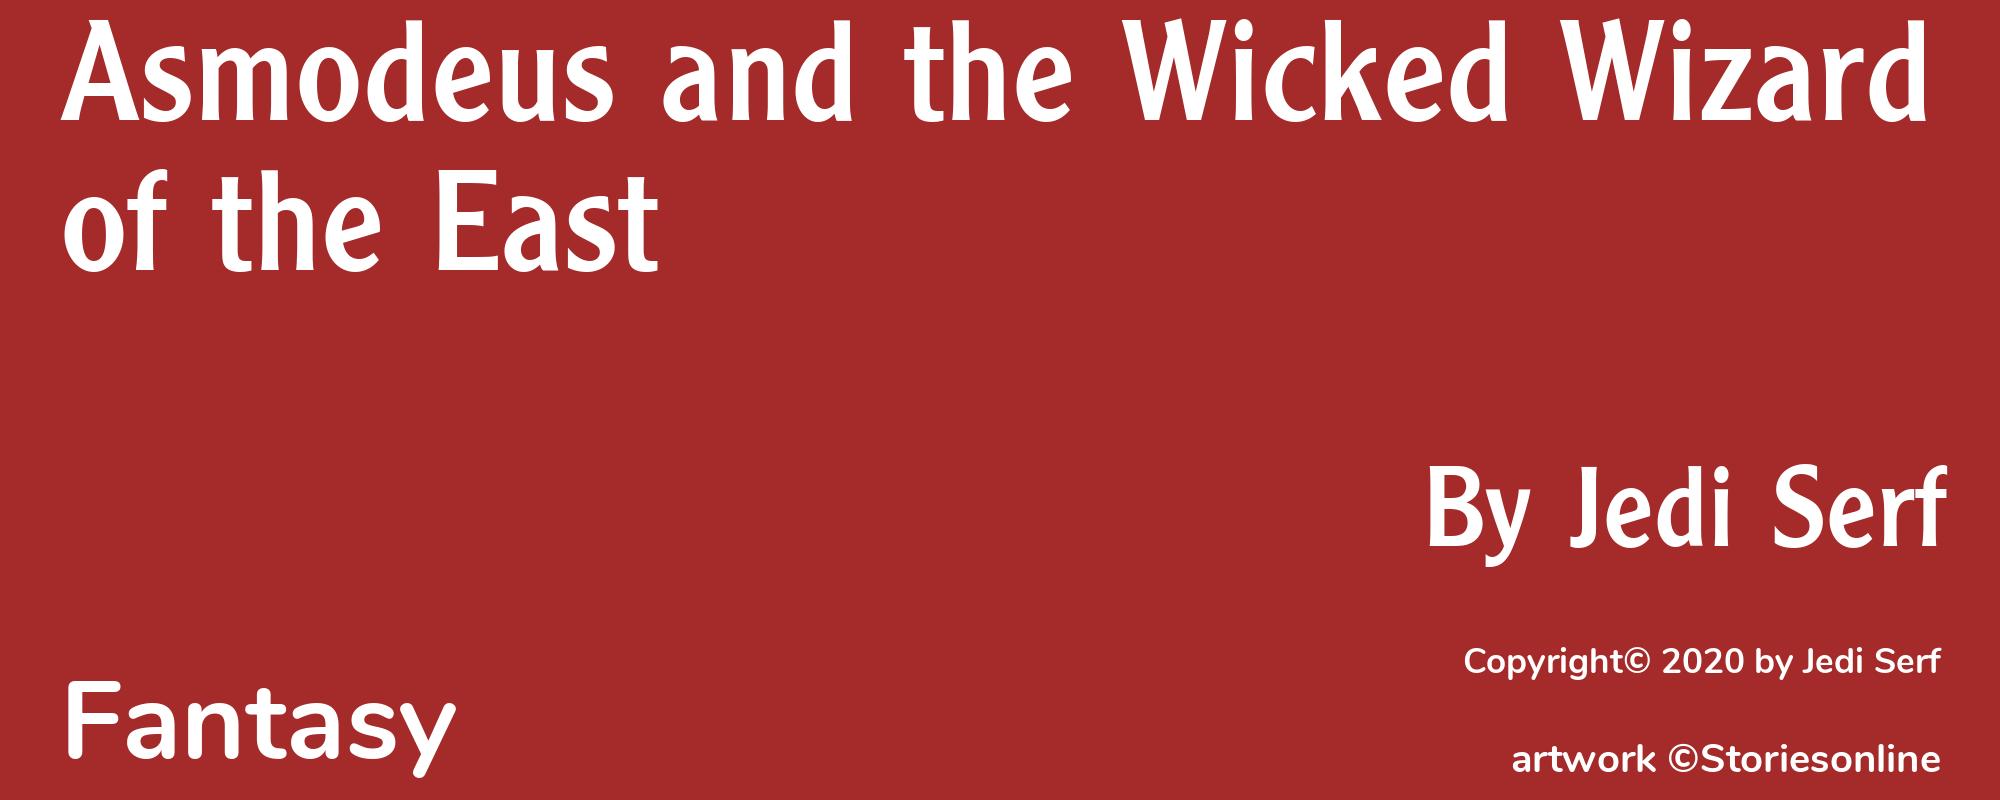 Asmodeus and the Wicked Wizard of the East - Cover